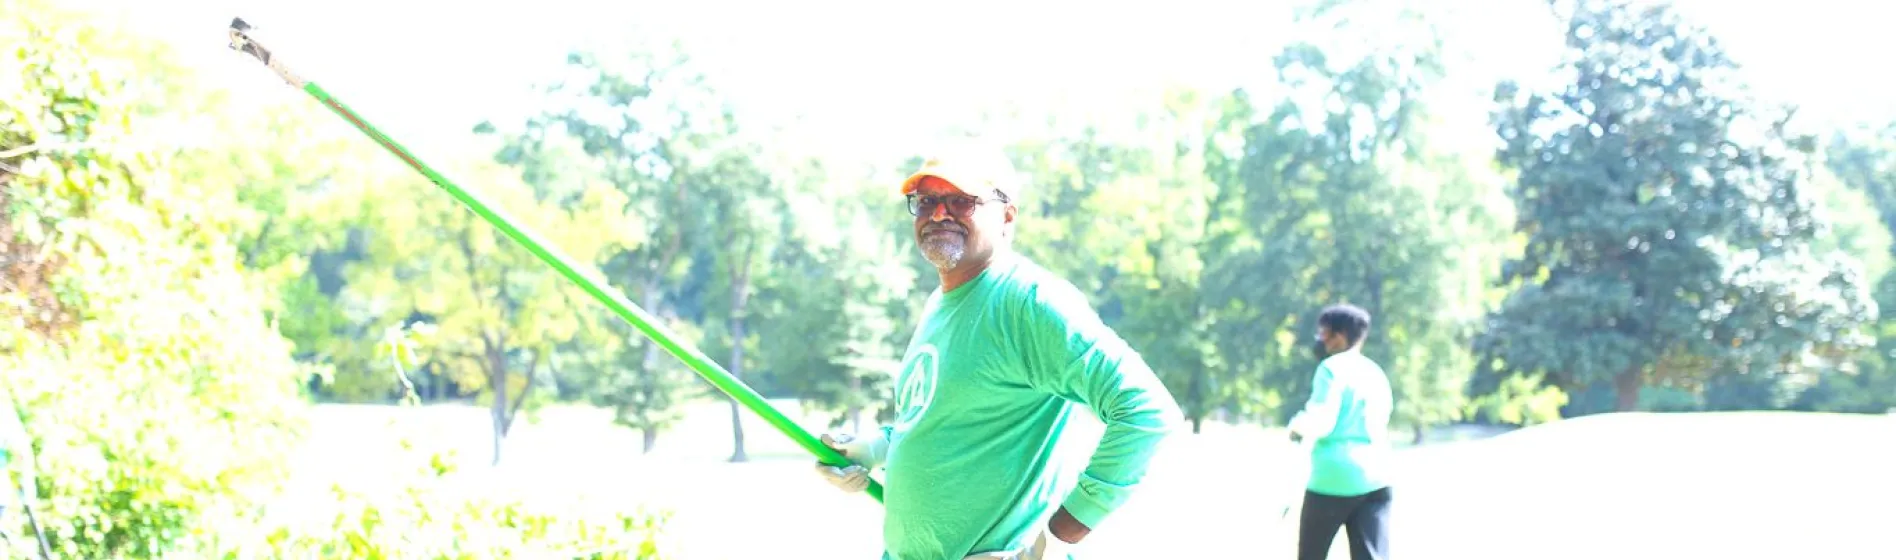 an international paper employee stands with a tree trimmer during an outdoor volunteer event